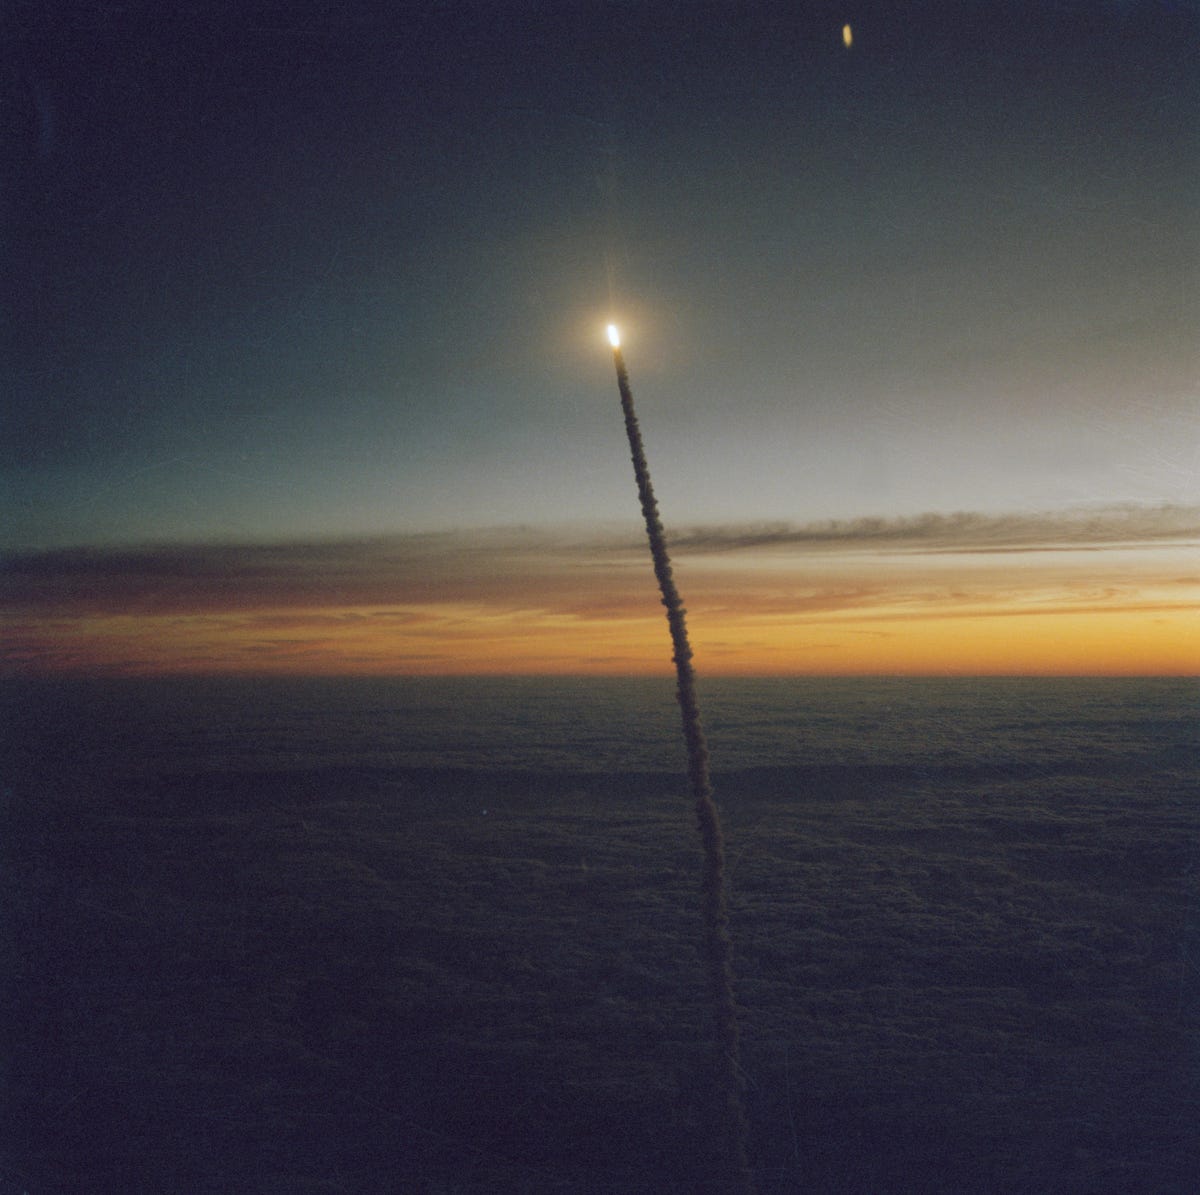 NASA's Challenger space shuttle lifts off on mission STS-41G.